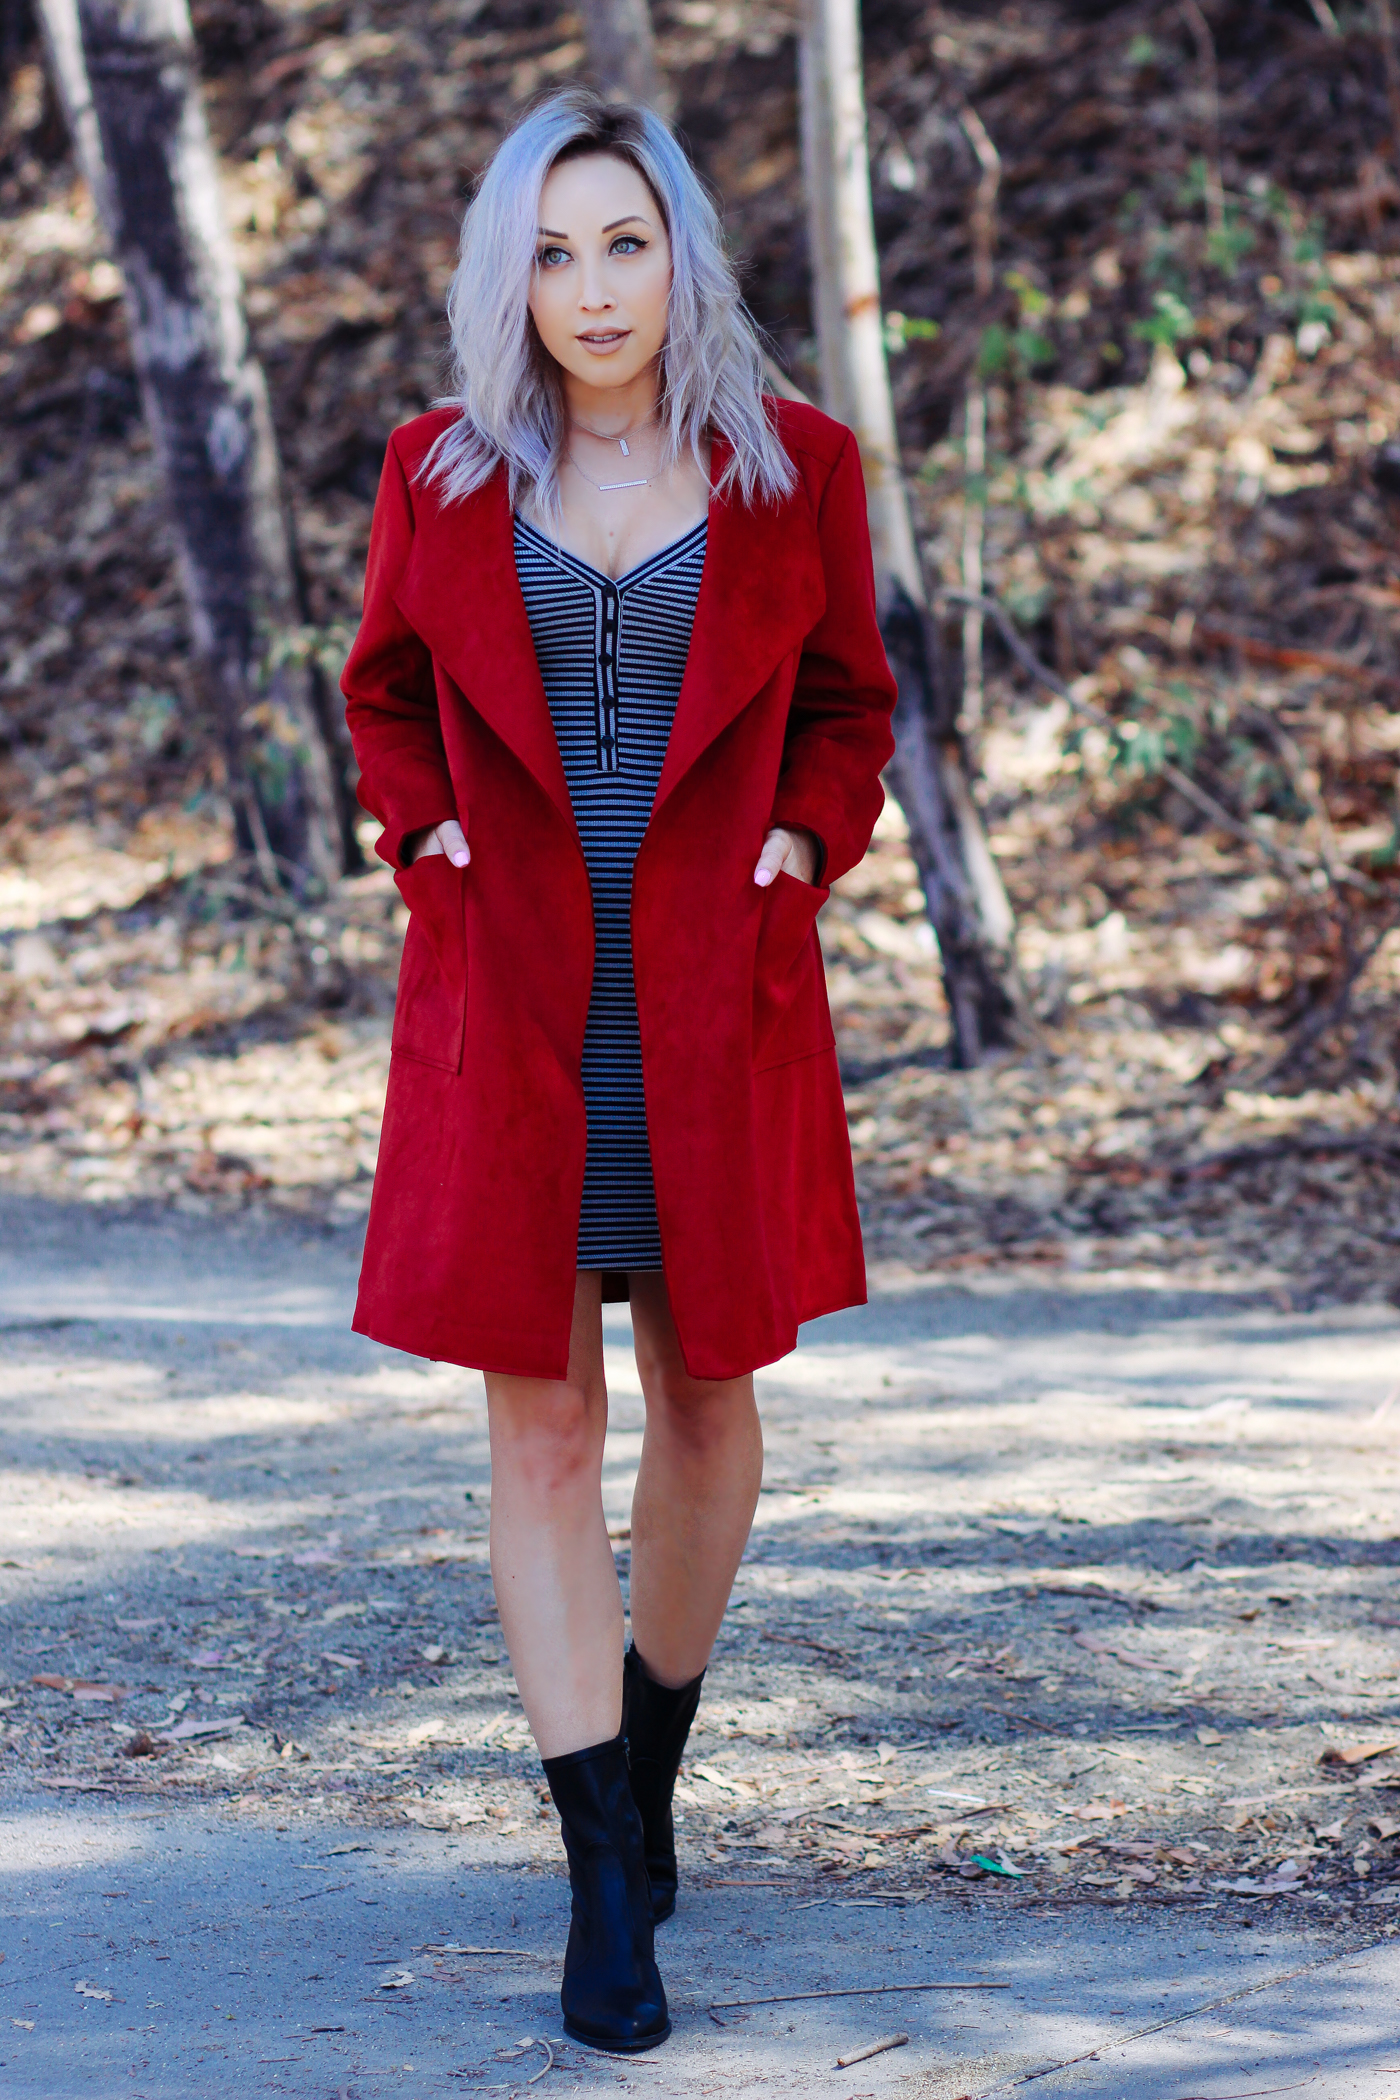 Blondie in the City | Red Coat, Striped Dress @justfabonline | Black Booties @shoedazzle | Fall Fashion